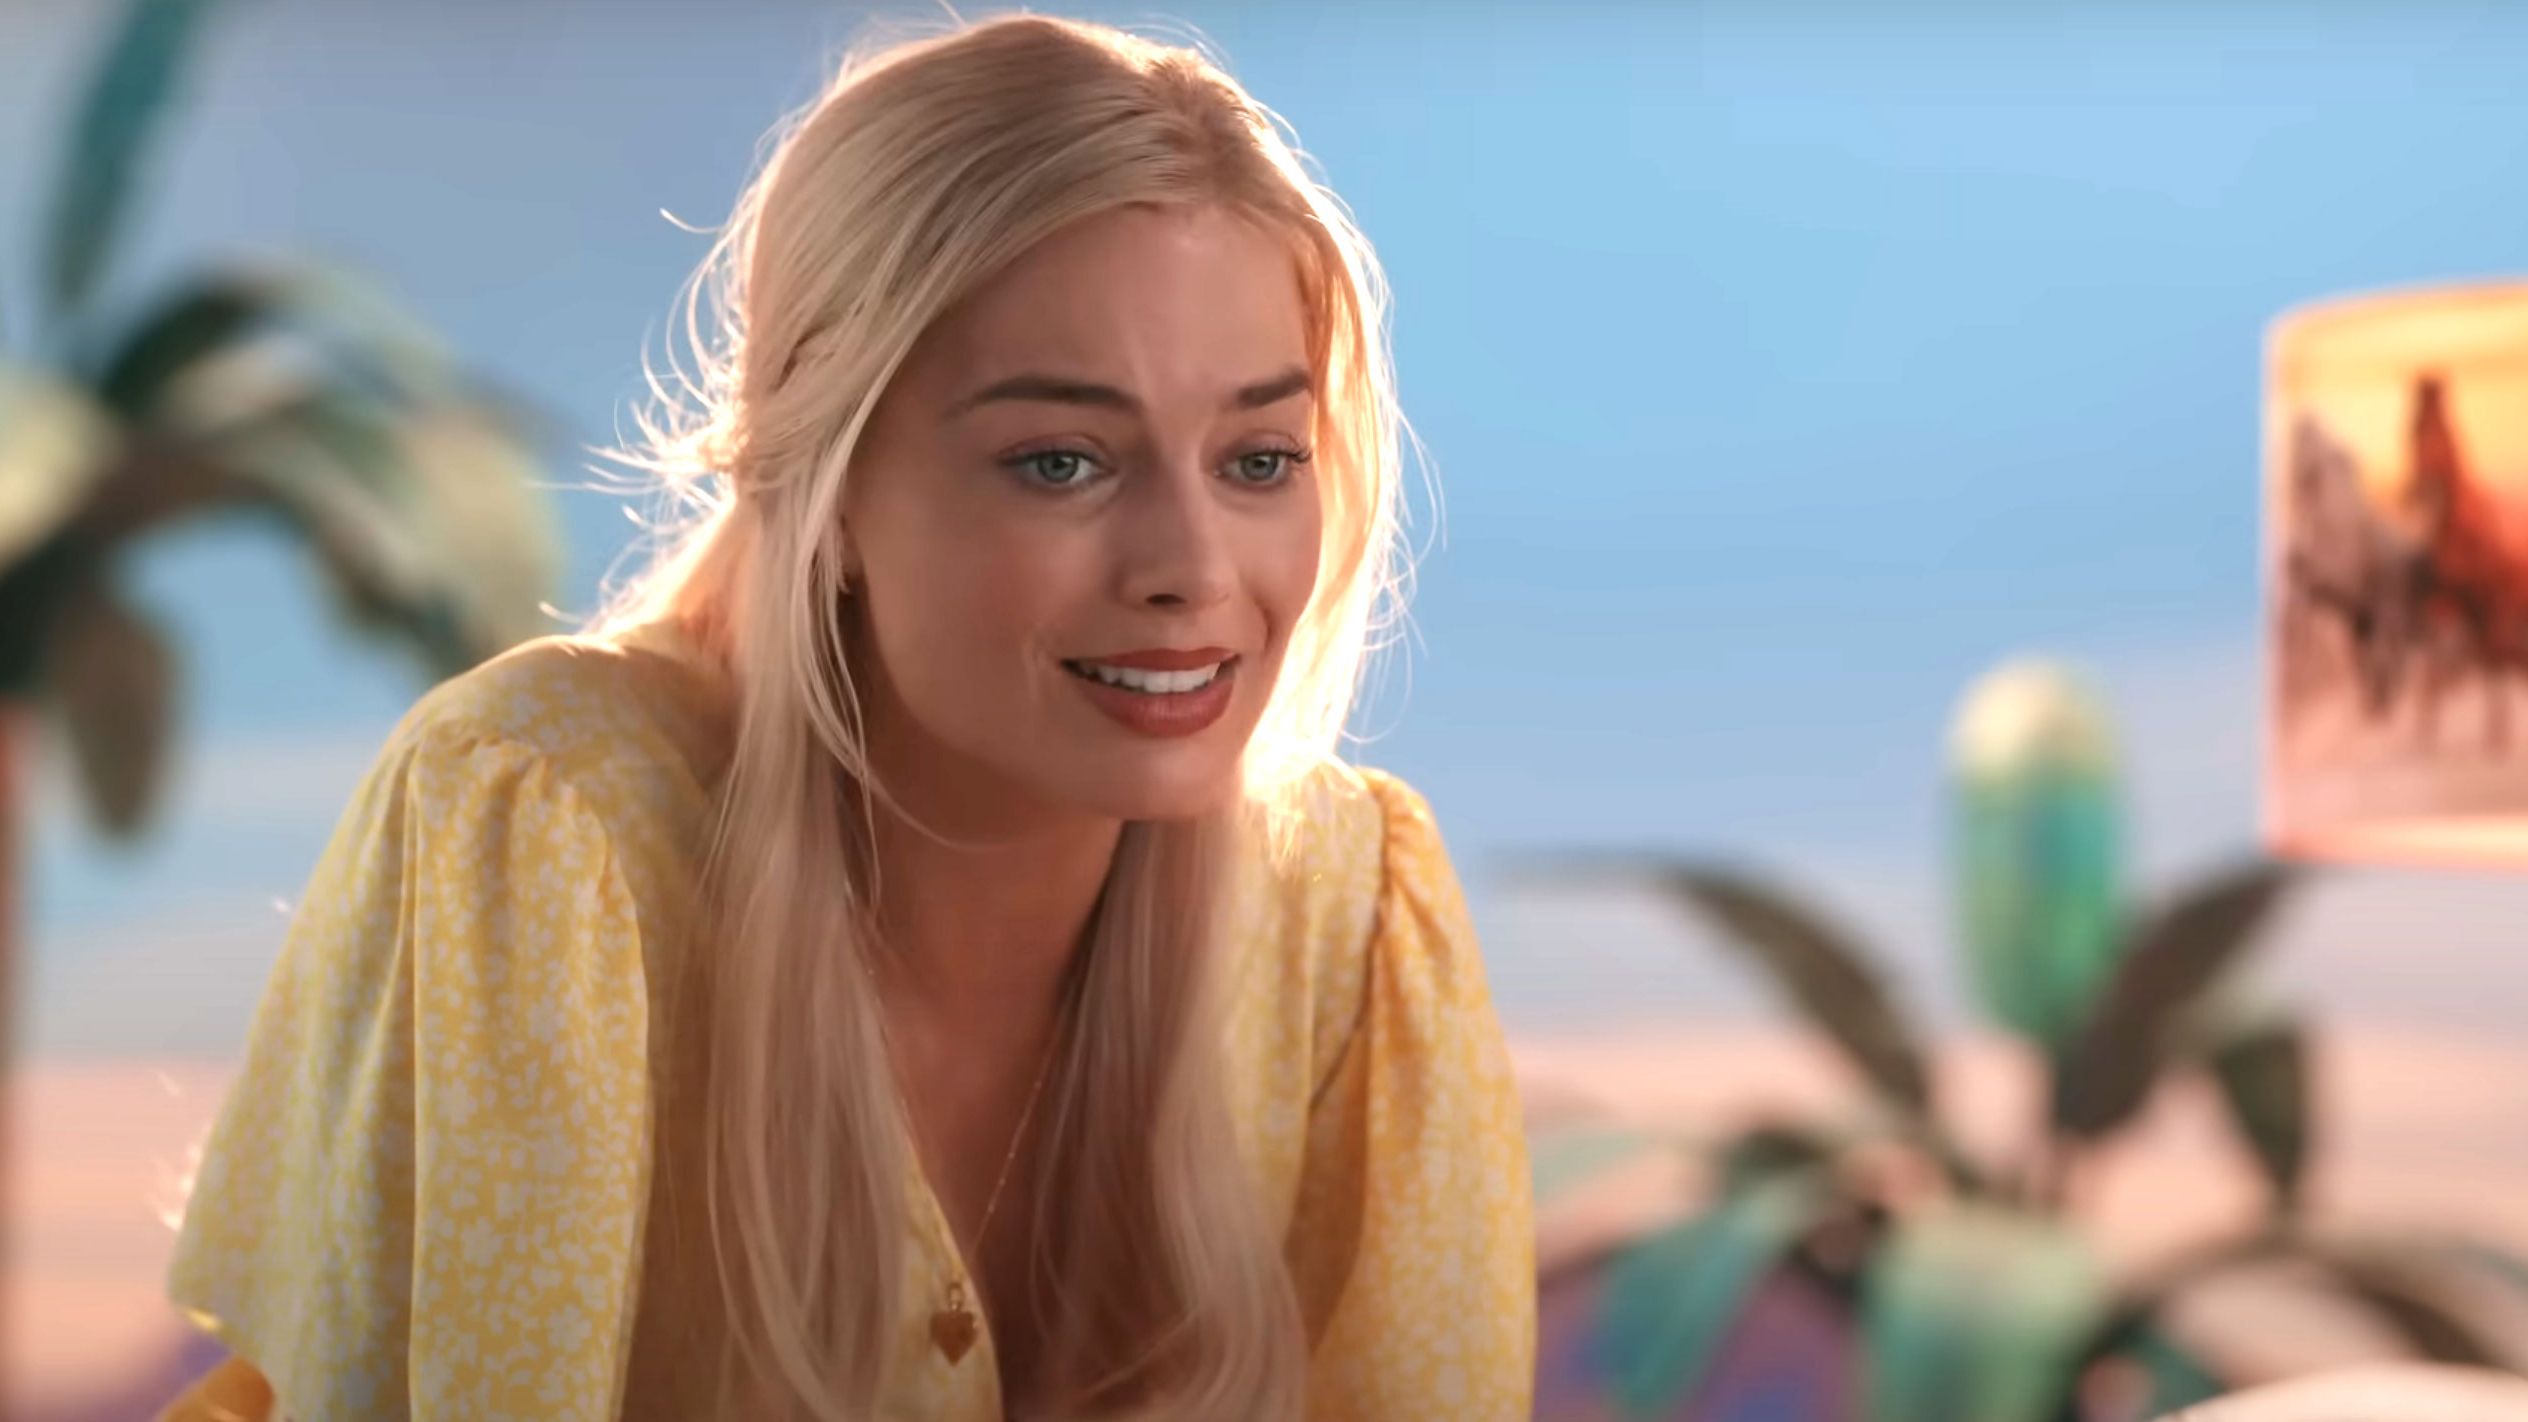 Barbie' Movie With Margot Robbie Generates Early Publicty